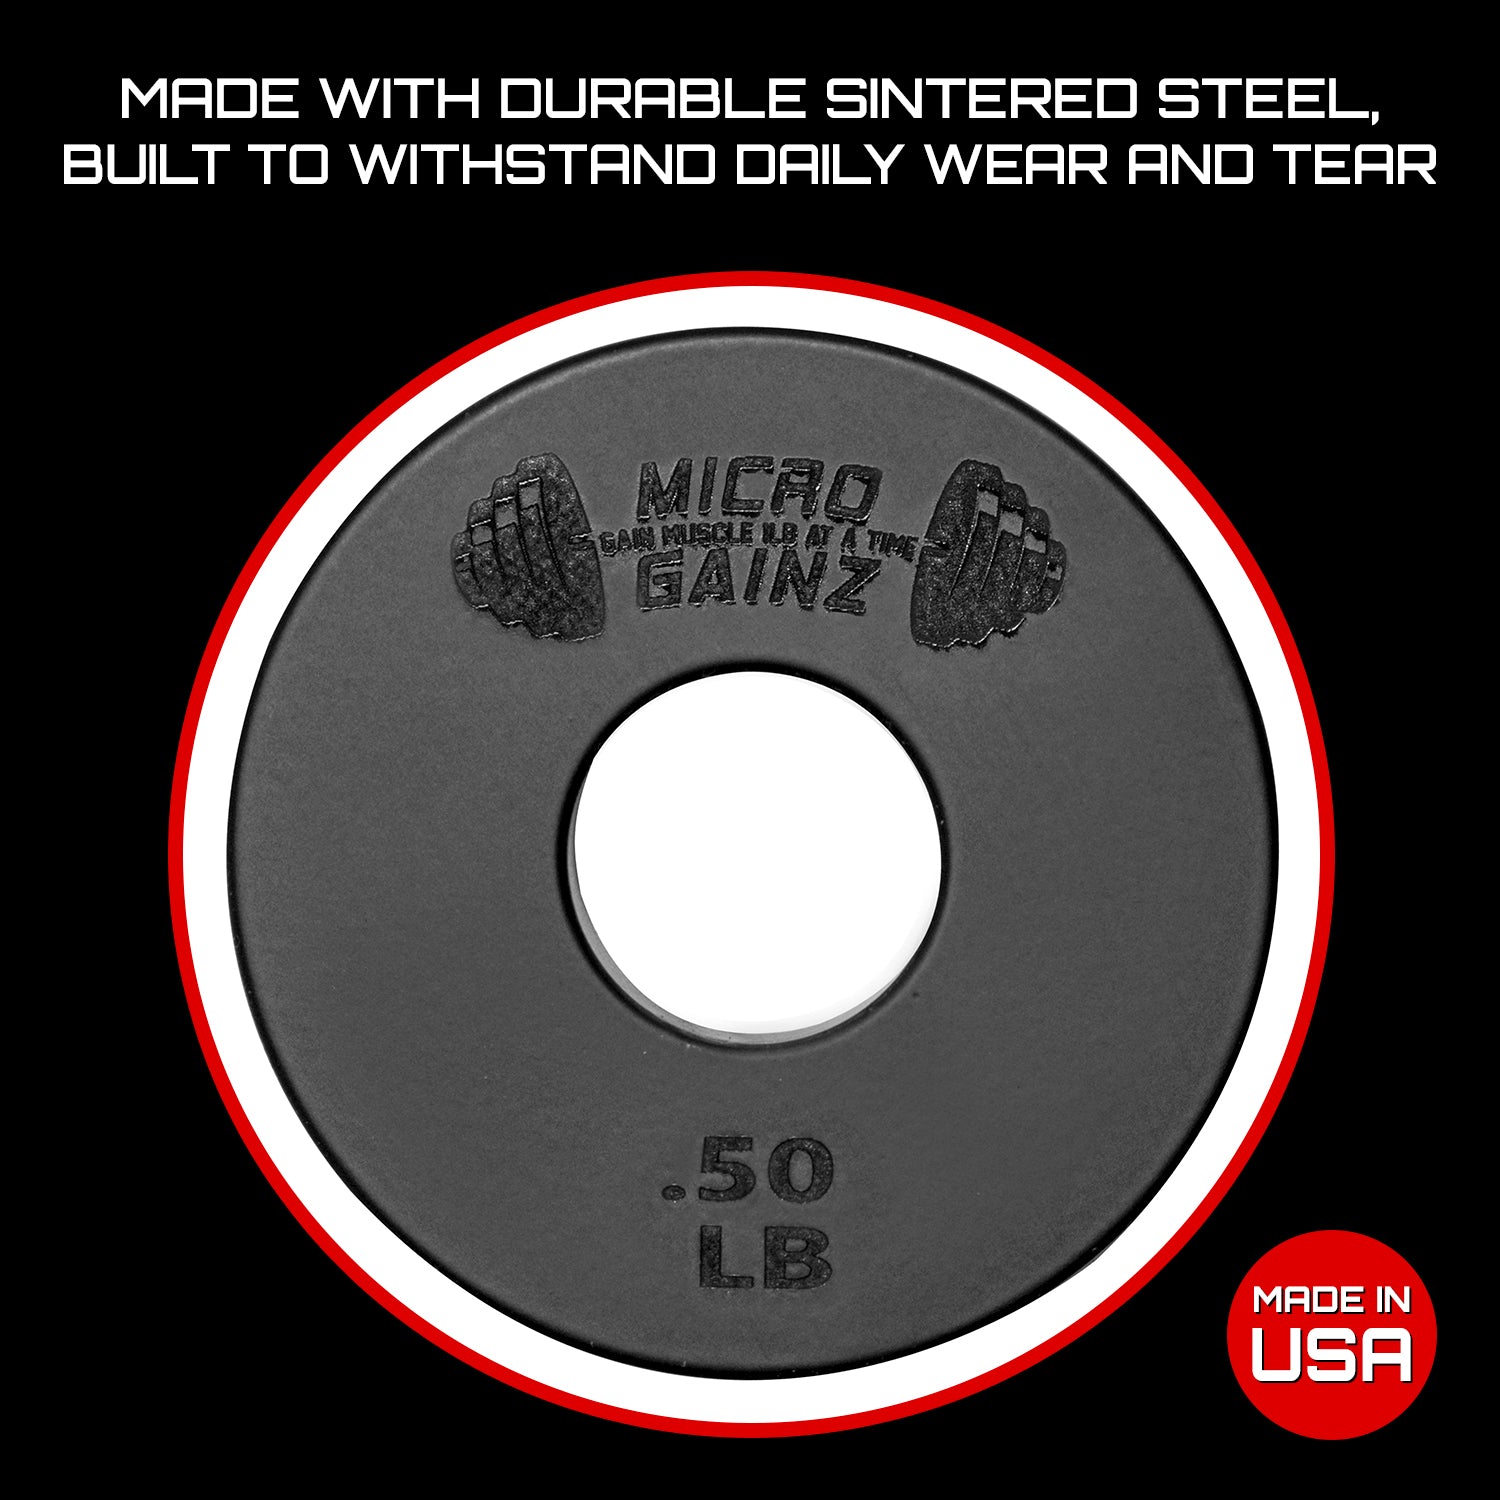 Micro Gainz Standard 1-Inch Center Hole Fractional Weight Plates Pair of .50LB Plates